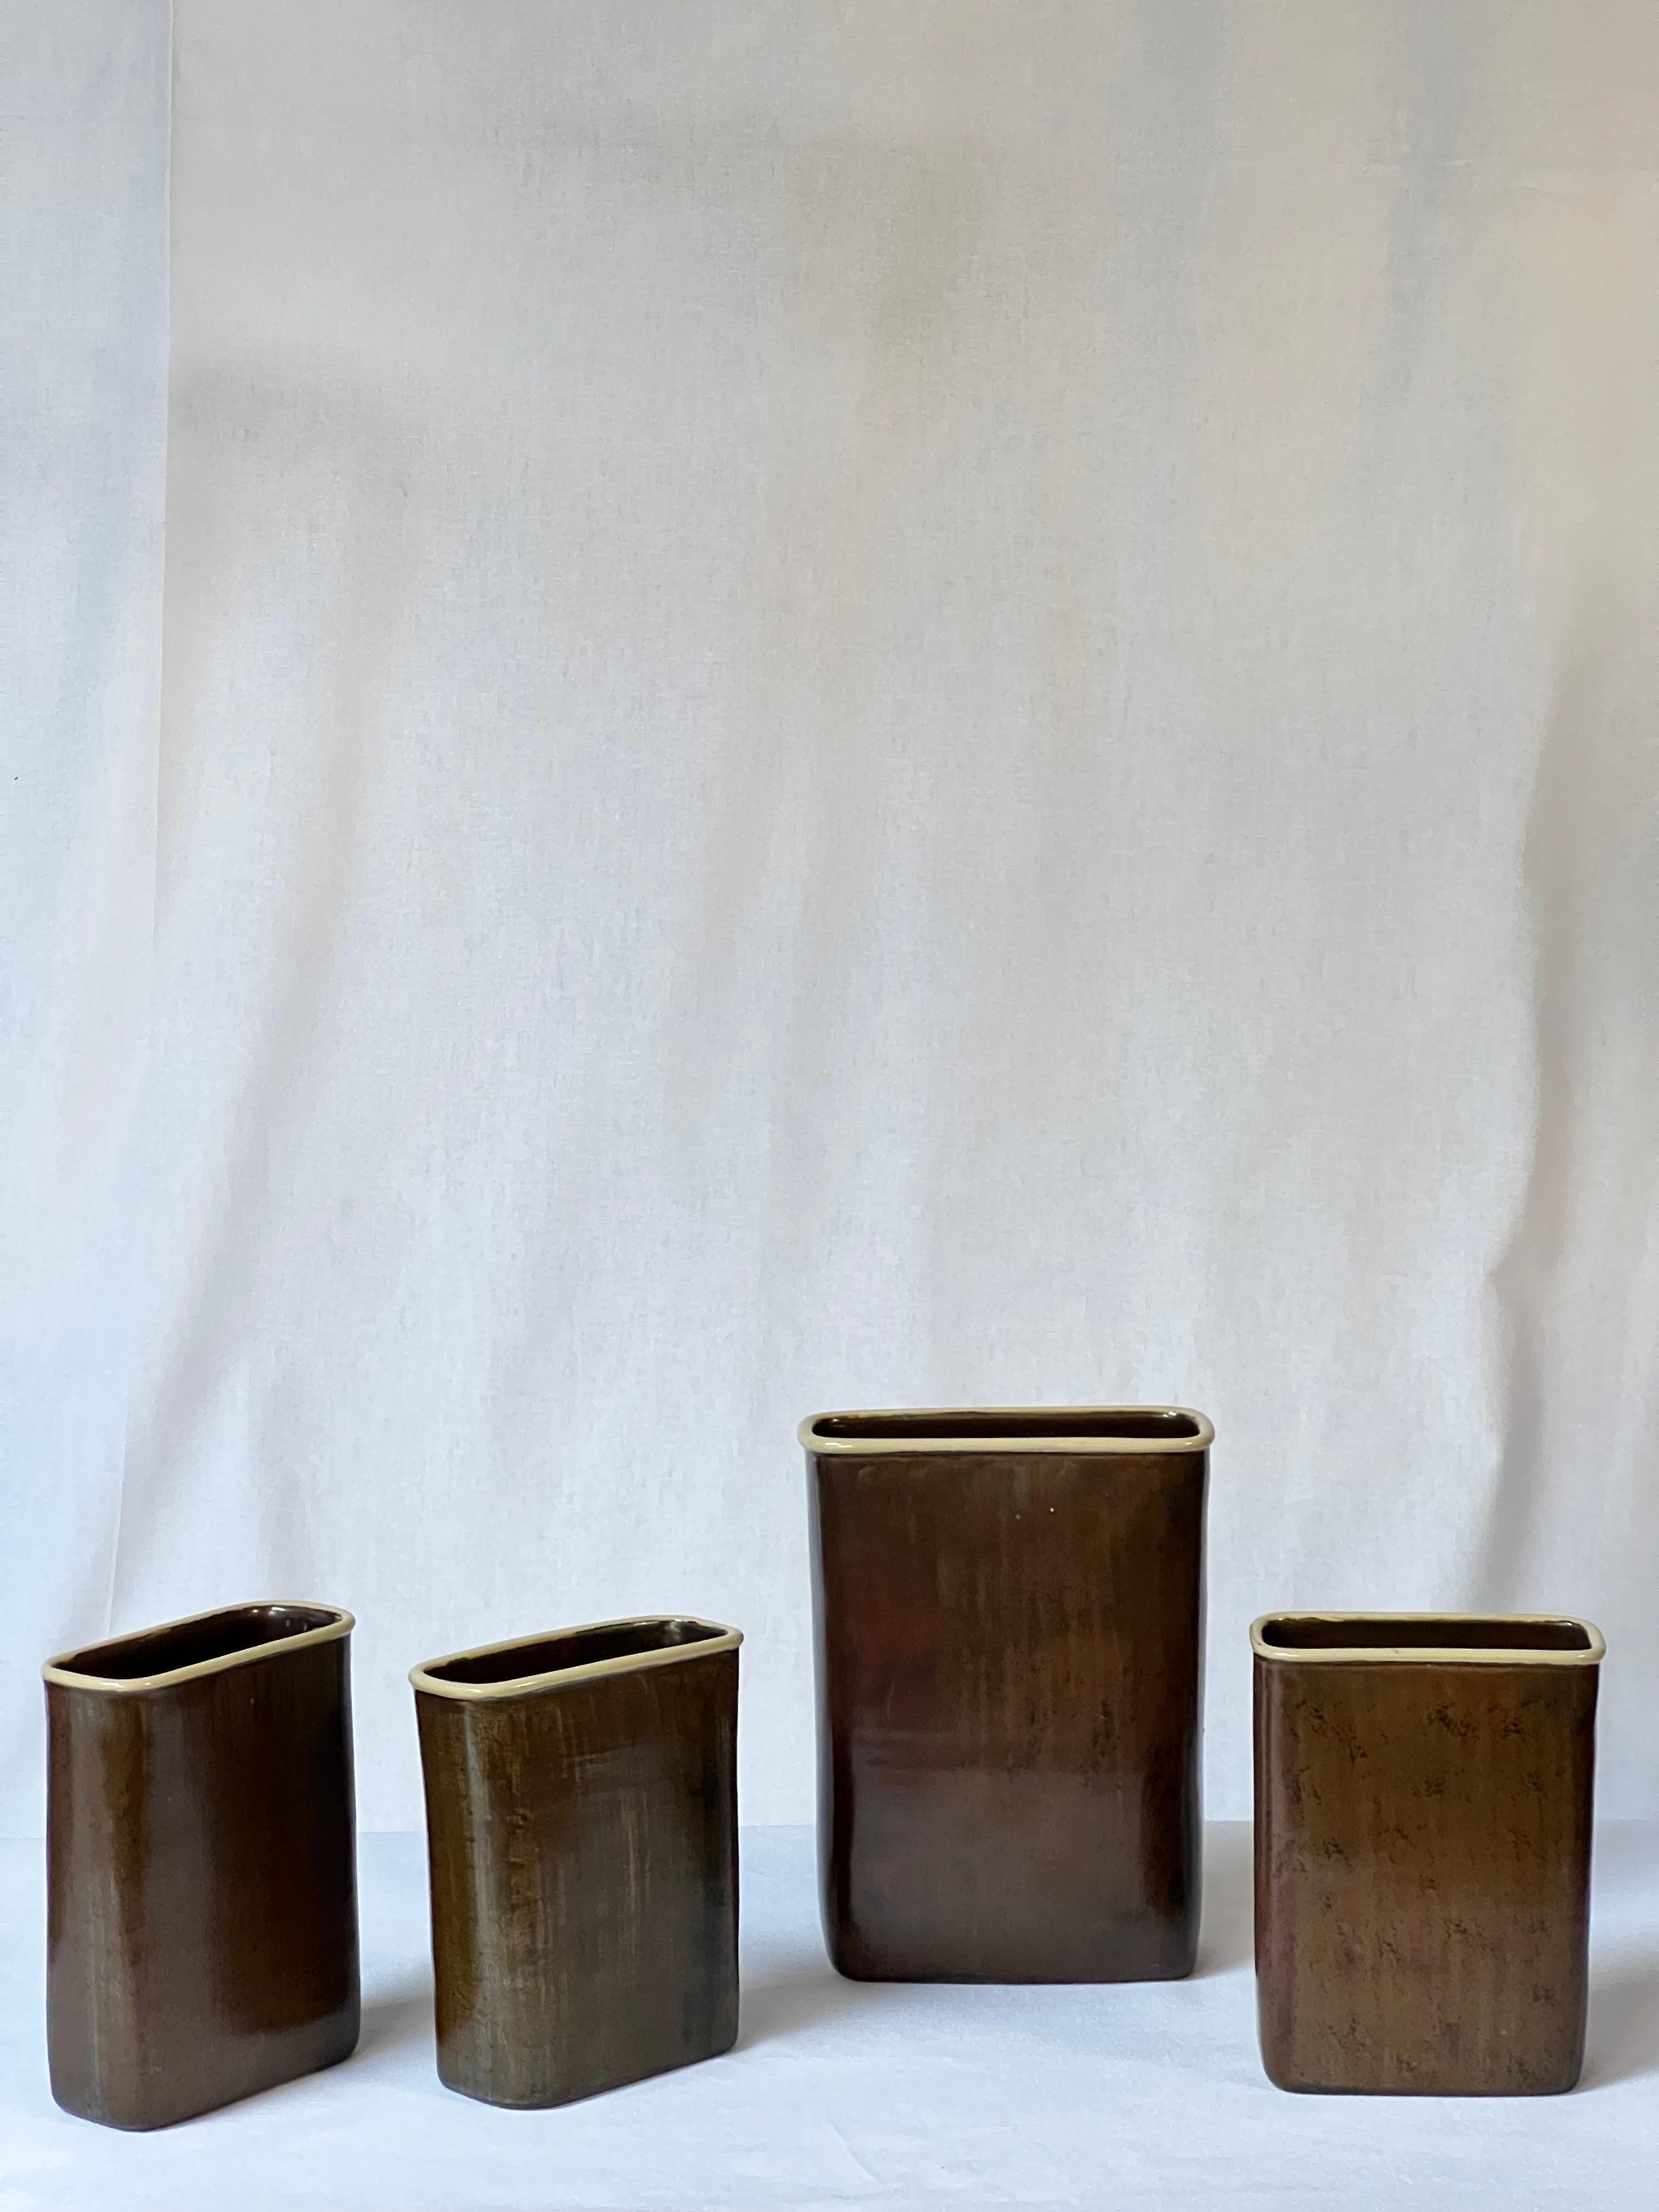 Set of 3 brown glazed plates by Swedish master Stig Lindberg in various size and shapes. From light brown to dark brown. Unique pieces made by hand and signed by the artist.



Stig Lindberg (17 August 1916 in Umeå, Sweden – 7 April 1982 in San